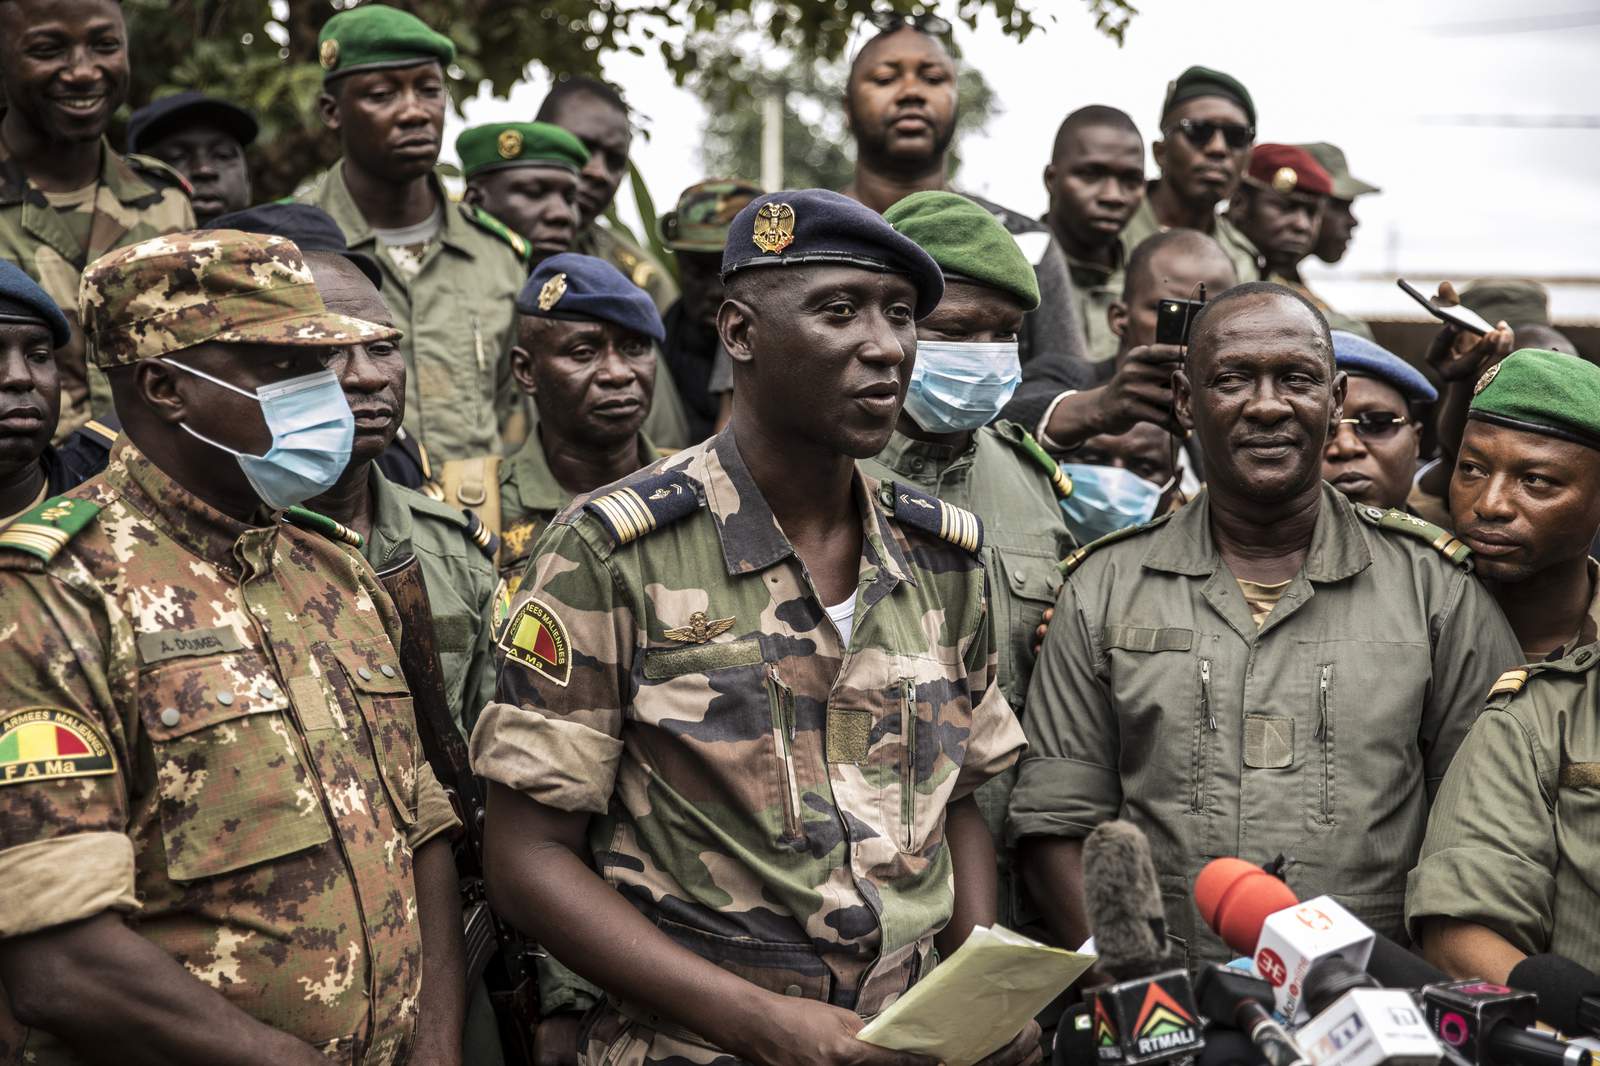 Mali army Col. Assimi Goita says he's in charge of junta